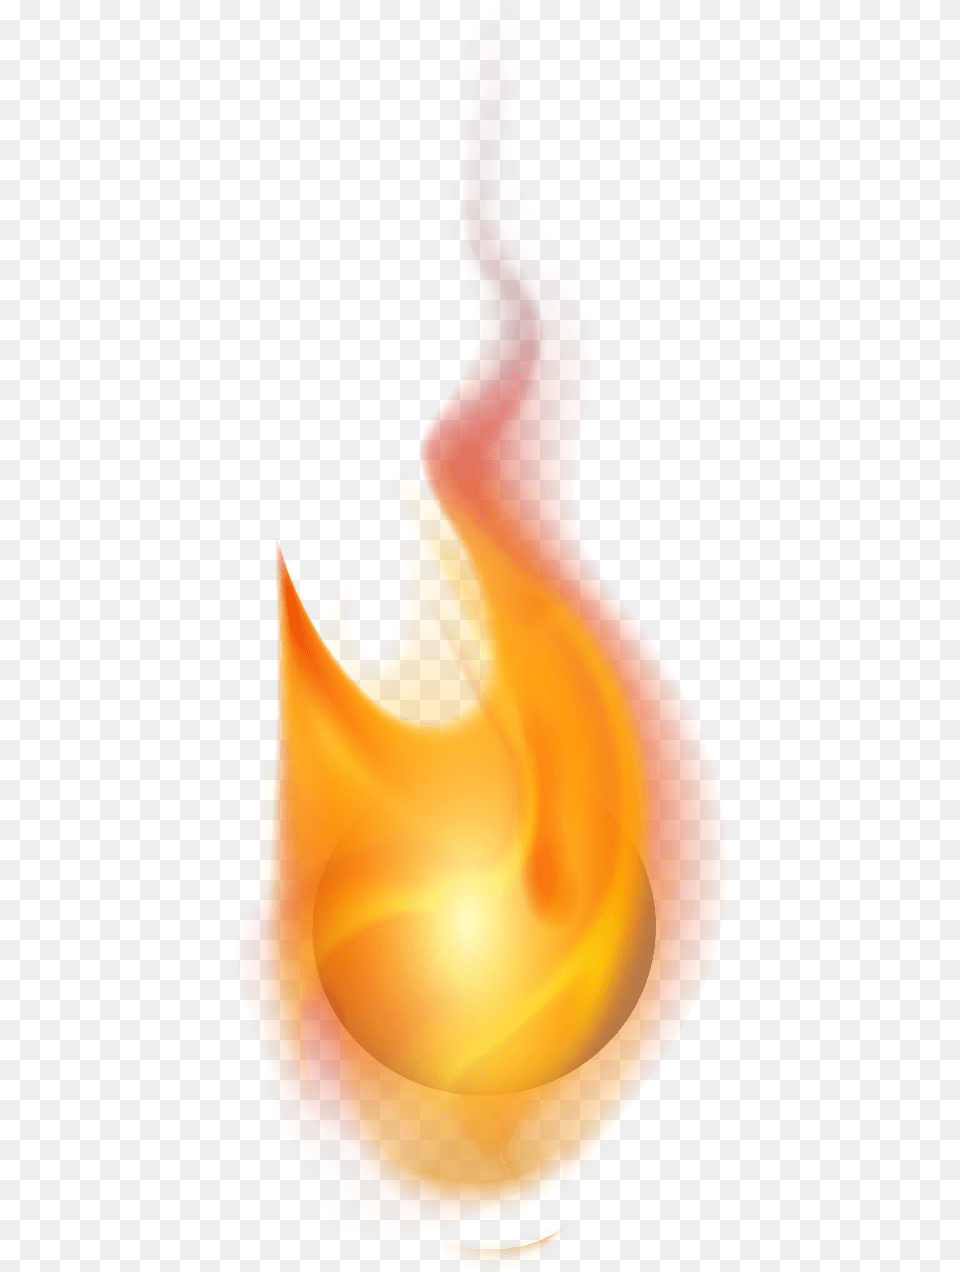 Fire Flame Image Portable Network Graphics, Light Free Png Download